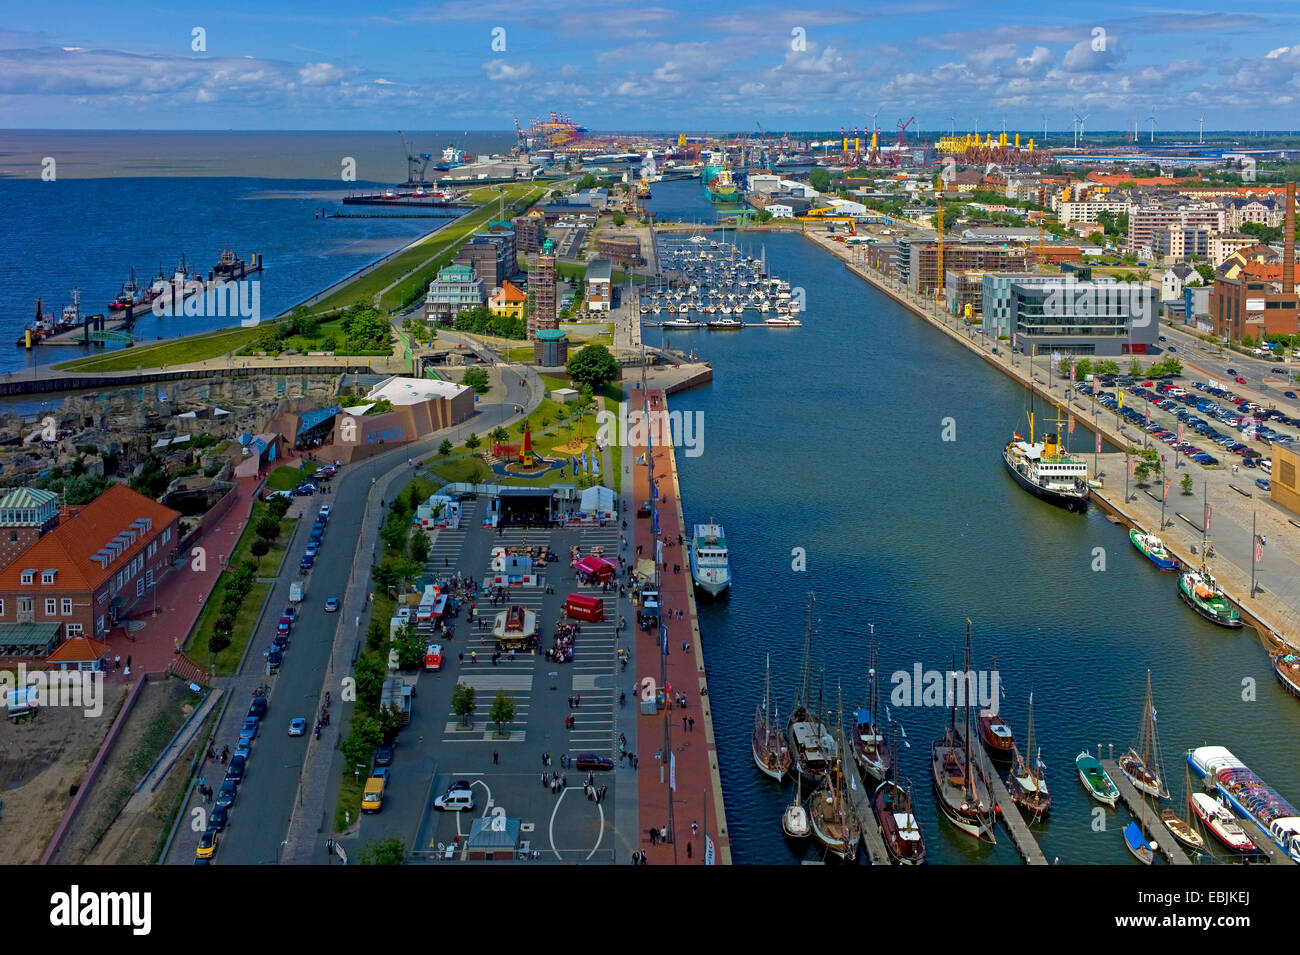 panoramic view over the Neuen Hafen, Havenwelten and marina with the container terminal in the background, Germany, Bremerhaven Stock Photo